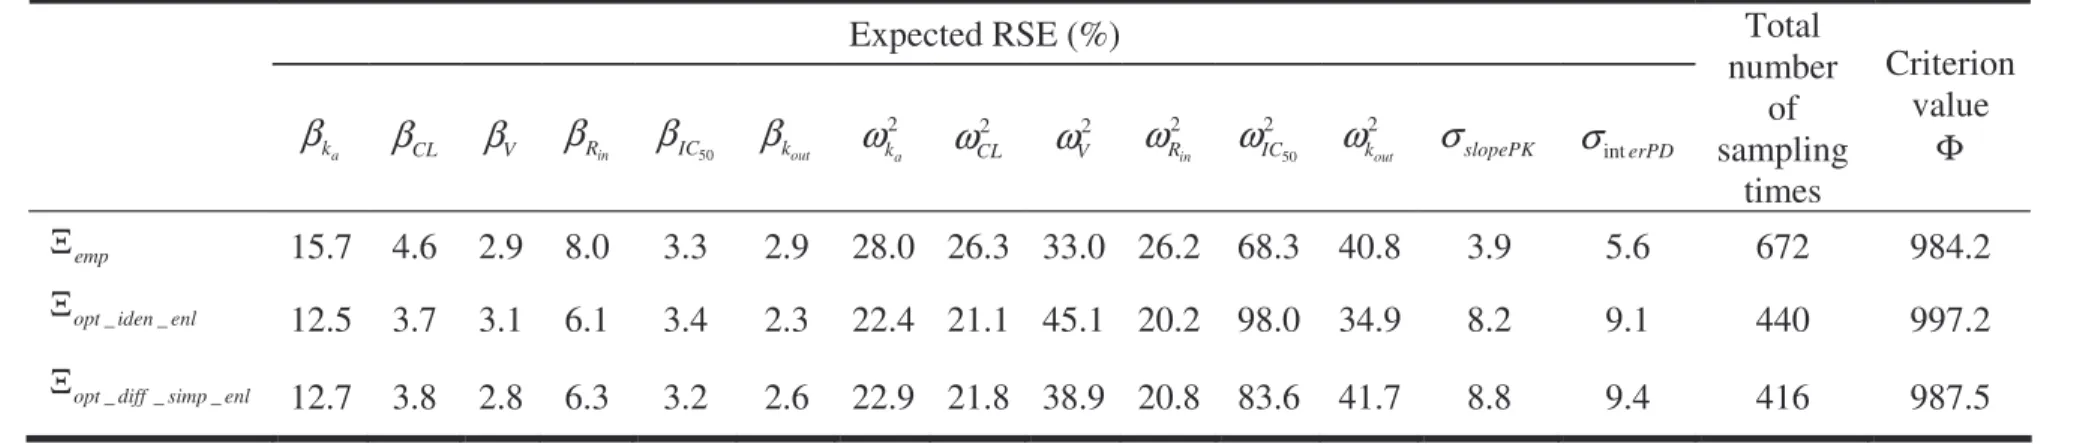 Table 4. Relative standard errors (RSE) (%) computed by the population Fisher information matrix for designs Ξ emp and for the enlarged designs Ξ opt iden enl__ and Ξ opt diff_ _ simp enl_ derived from the two optimal designs by increasing the number of su